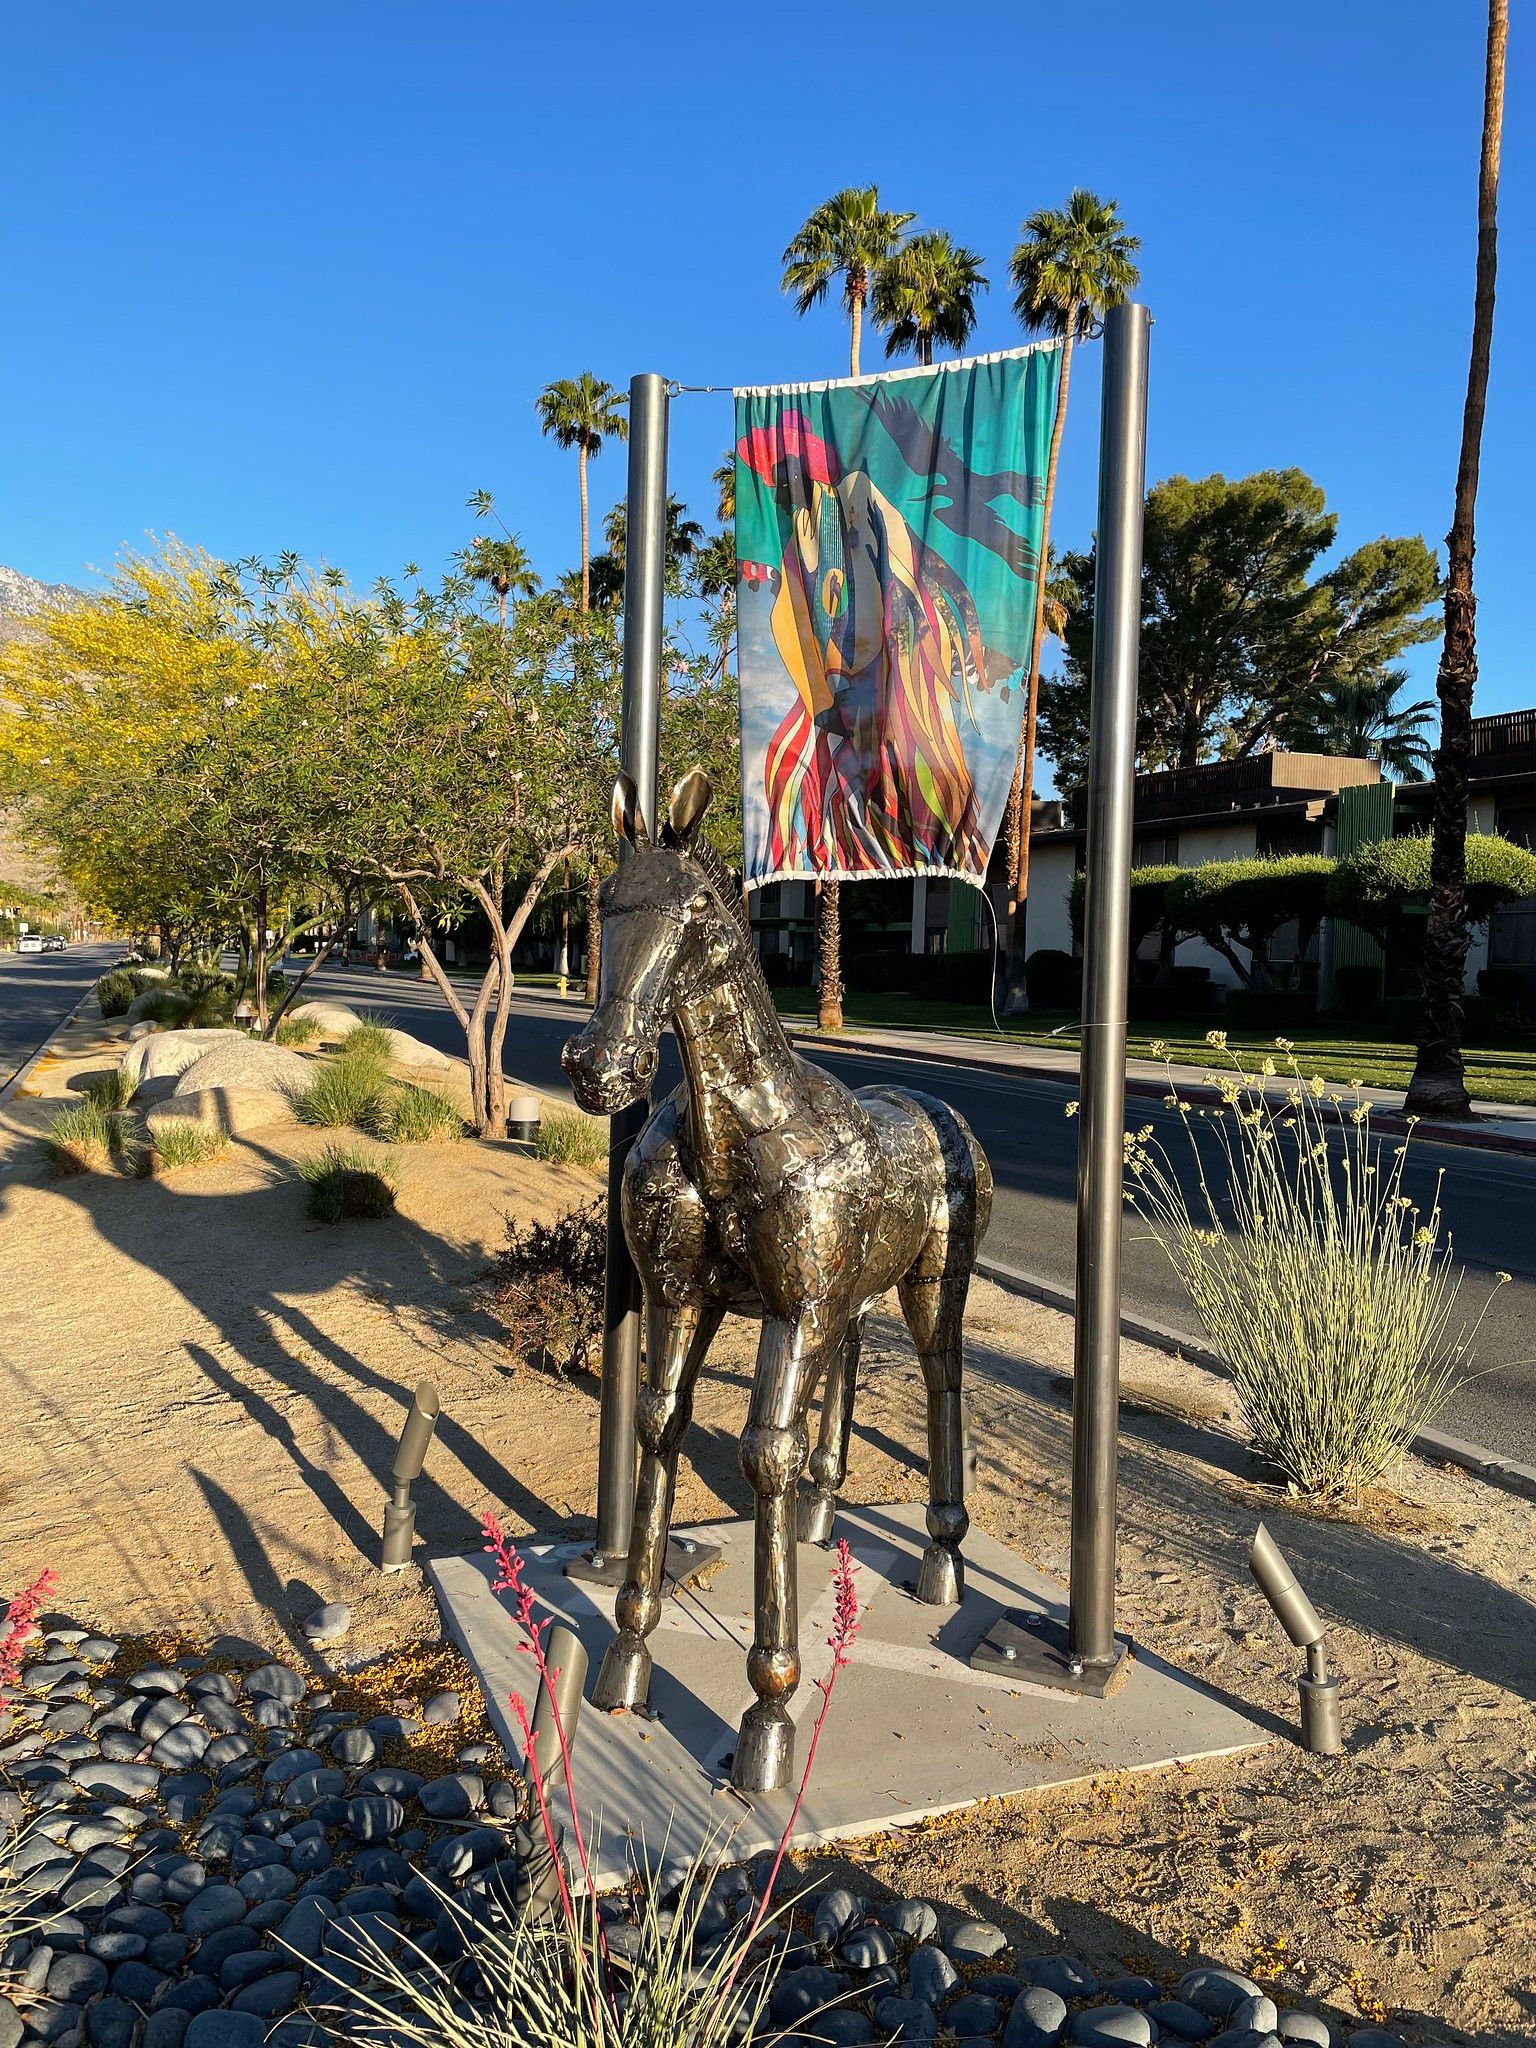 The Art Of Taming Horses That Is Part Of Palm Springs Sculptures Outdoors.